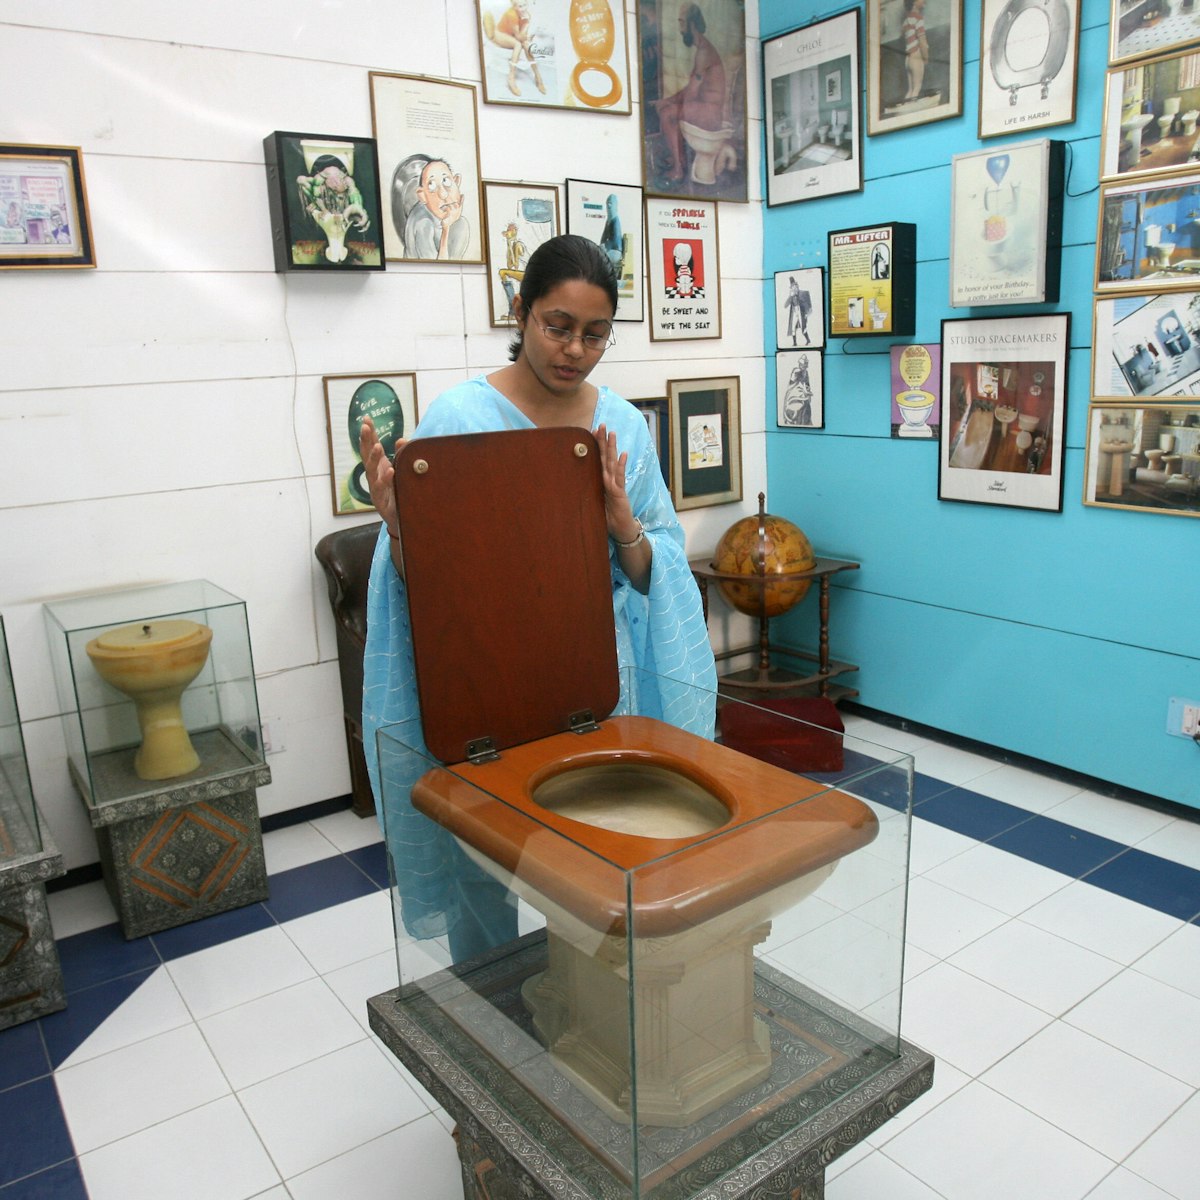 TO GO WITH STORY BY TRIPTI LAHIRI  An employee of the Sulabh International Museum of Toilets displays a Fancy Toilet used in the 1930s at the museum in New Delhi, 27 October 2007.   For India's low-cost toilet champion, each new loo means freedom not just from rampant disease, but one more chance to liberate someone from doing the awful job of disposing of someone else's waste. In the centuries-old caste system, with its ingrained fear of "pollution," the deepest revulsion has traditionally been reserved for those who do India's dirty work, such as taking away human waste from homes in buckets. AFP PHOTO/RAVEENDRAN (Photo credit should read RAVEENDRAN/AFP/Getty Images)